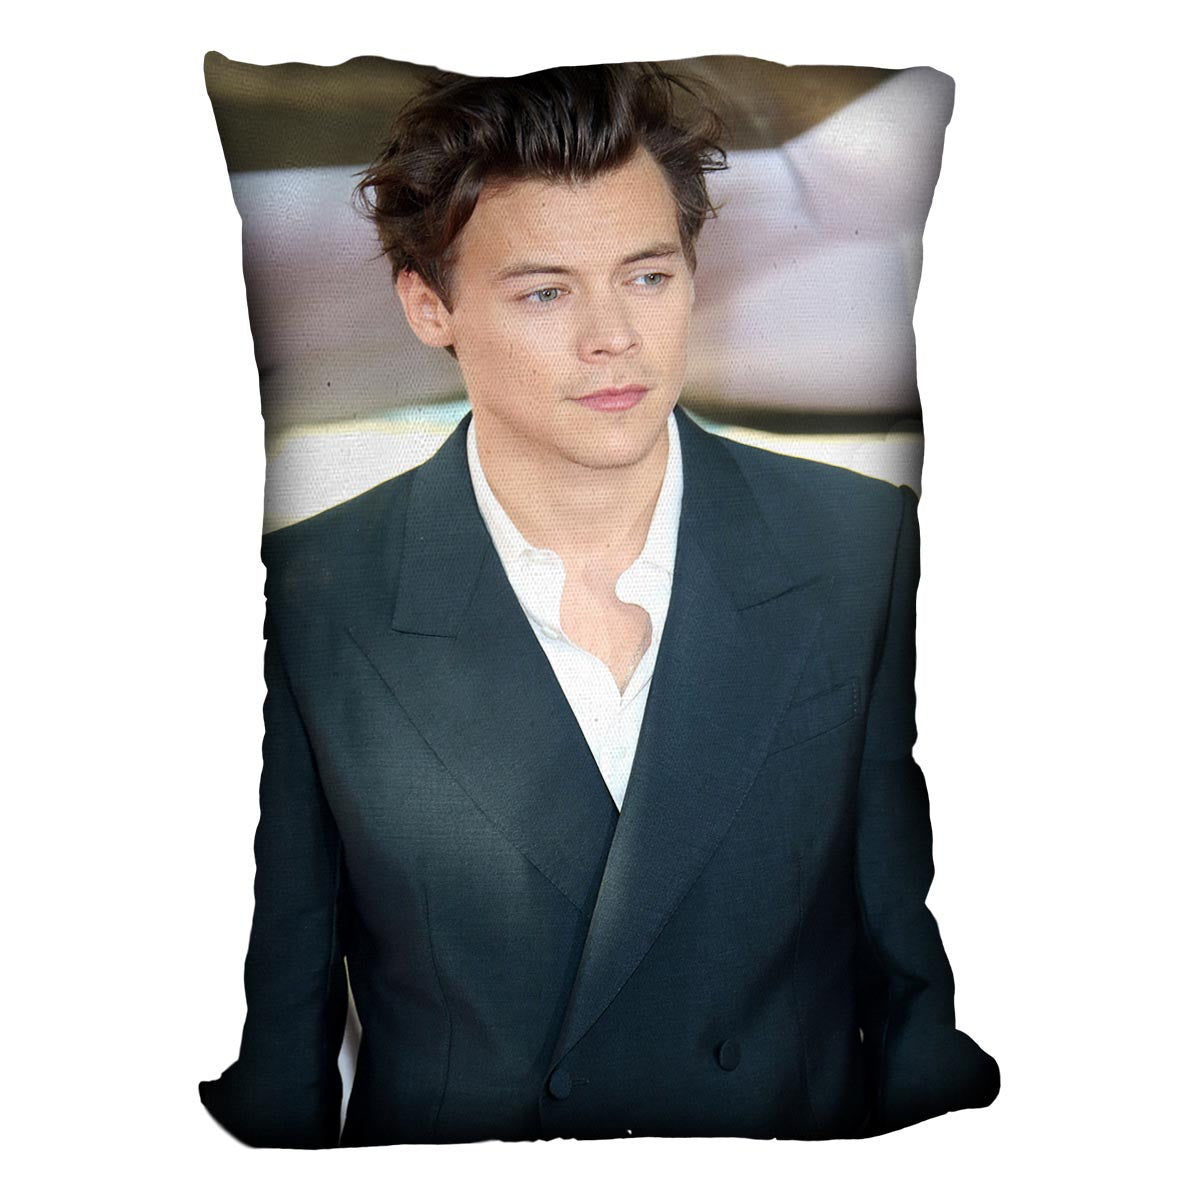 Harry Styles from One Direction Cushion